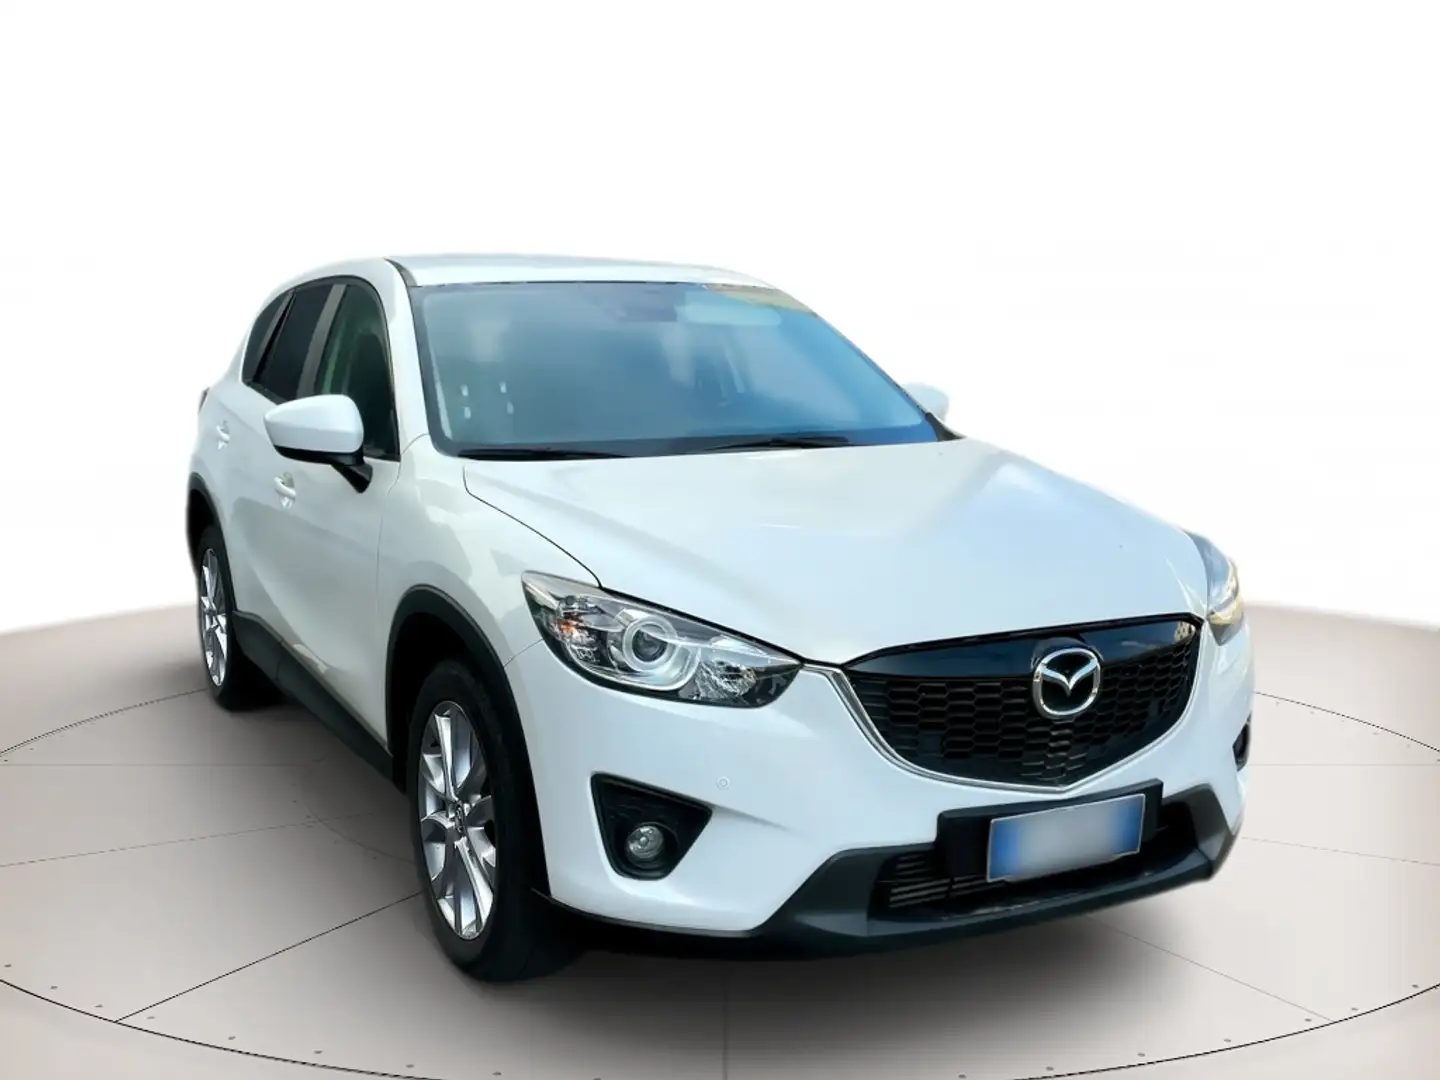 Mazda CX-5 I - CX-5 2.2 Exceed 4wd 150cv 6at Weiß - 2